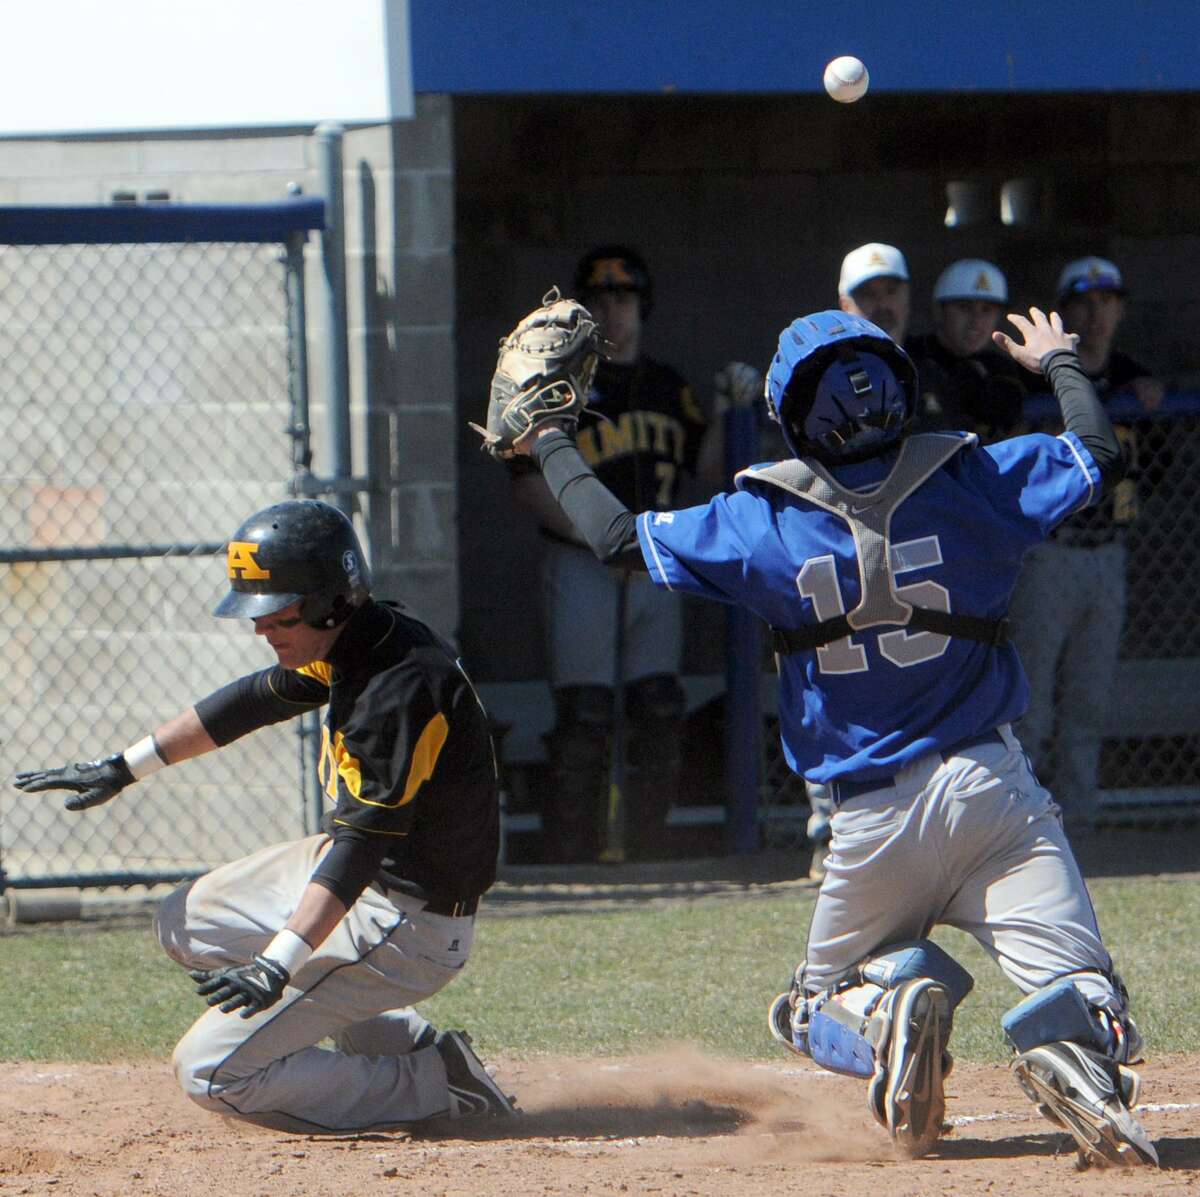 Jake Russo of Amity, left, slides into home plate for a run against West Haven earlier this season. Amity fell to Xavier on Monday. Photo by Peter Hvizdak / New Haven Register.